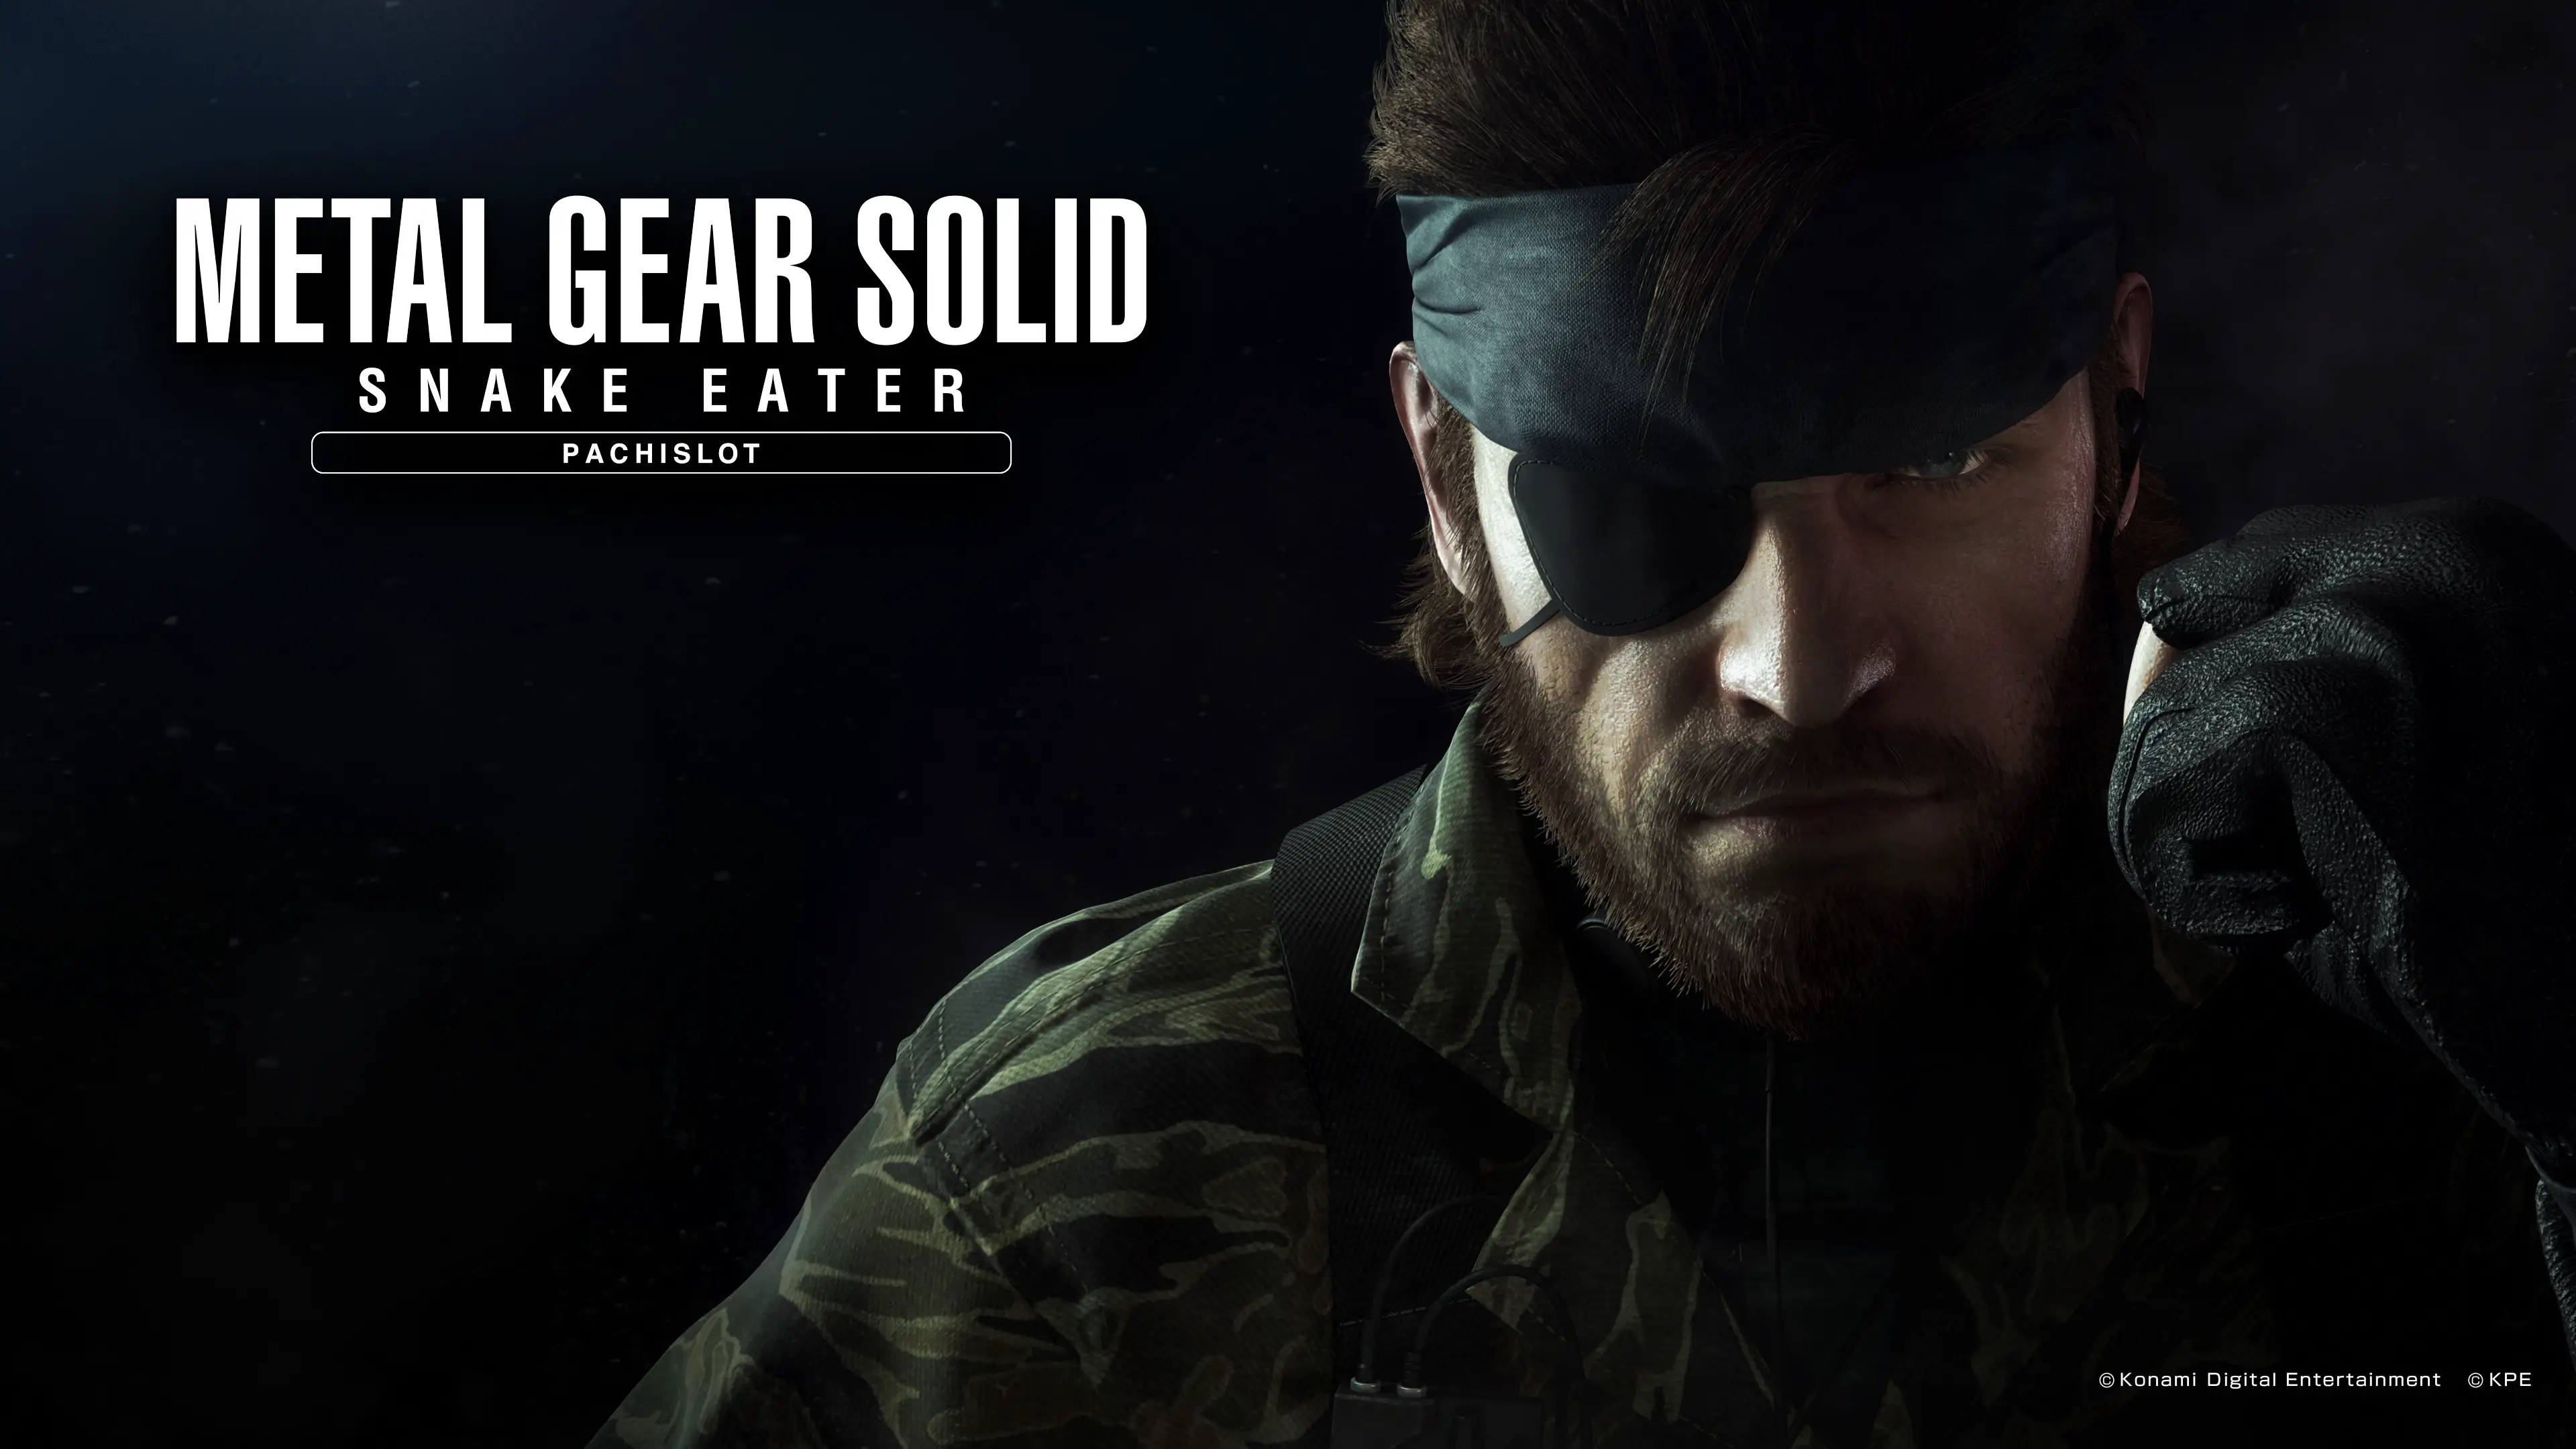 Official Metal Gear Solid Snake Eater Pachislot wallpapers 